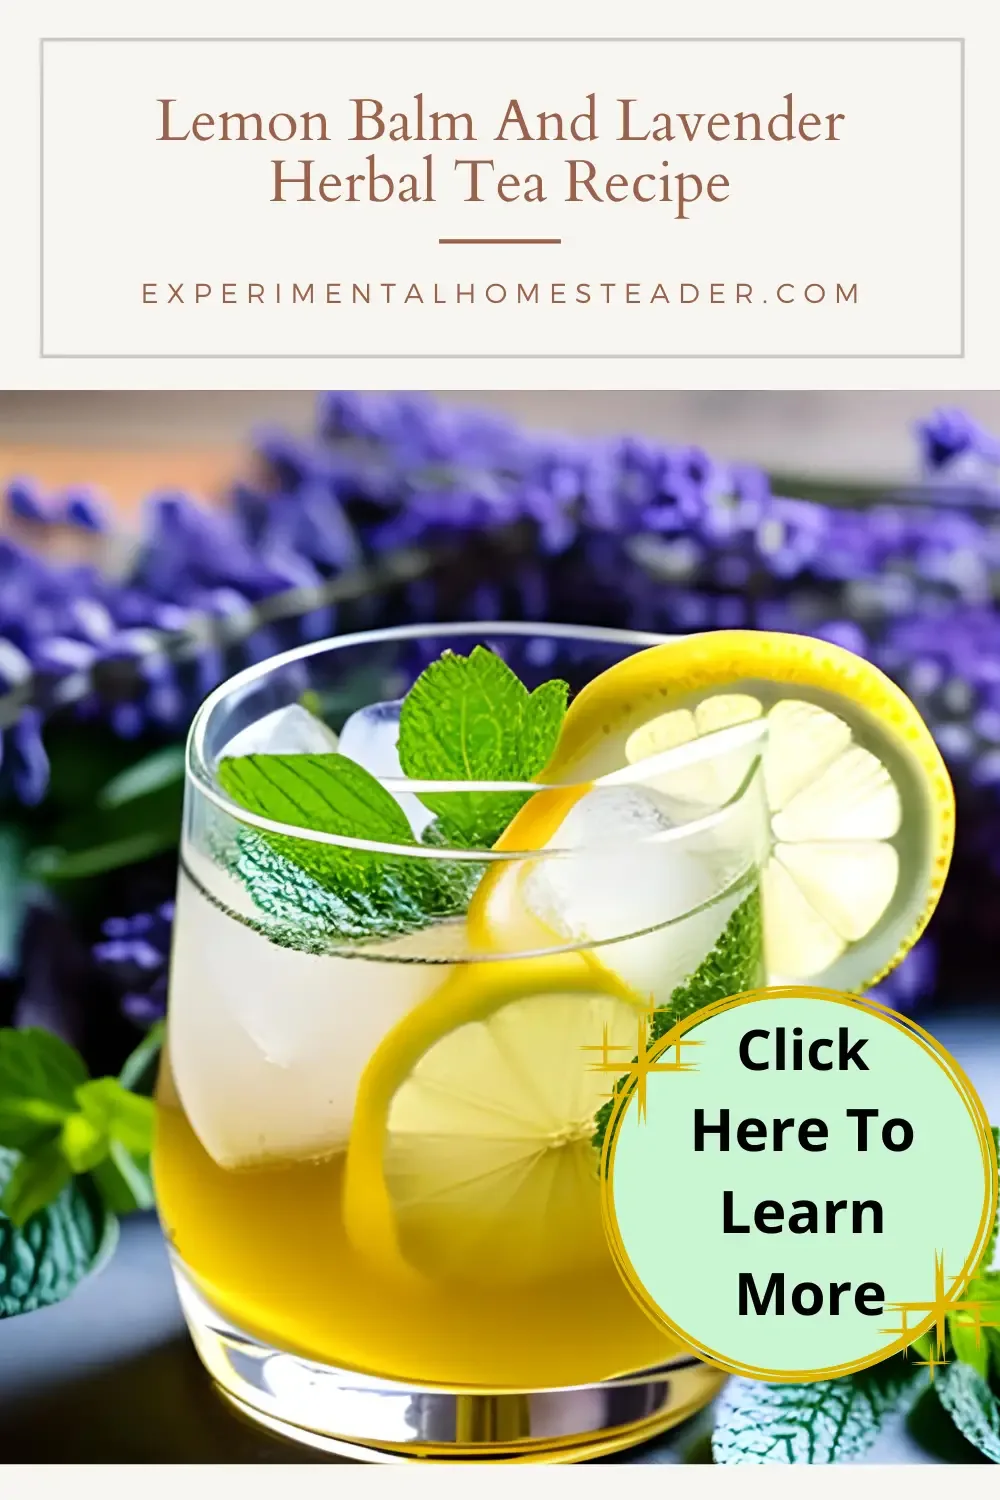 Ice tea in a pitcher and in a glass with ice, lemon slices and lemon balm. Lavender in the background.